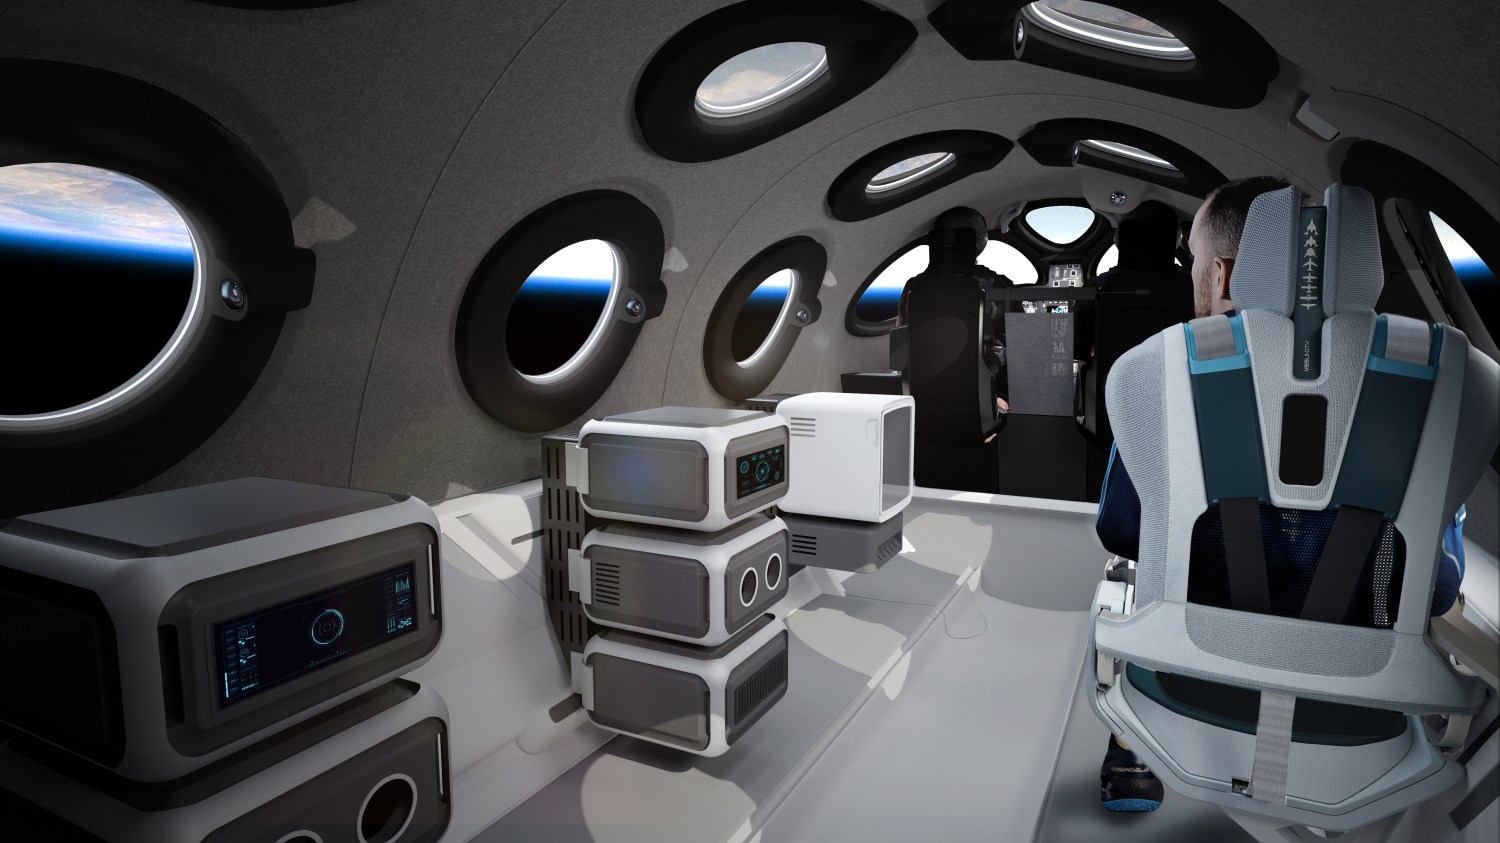 Virgin Galactic Spaceship Cabin In Payload Configuration